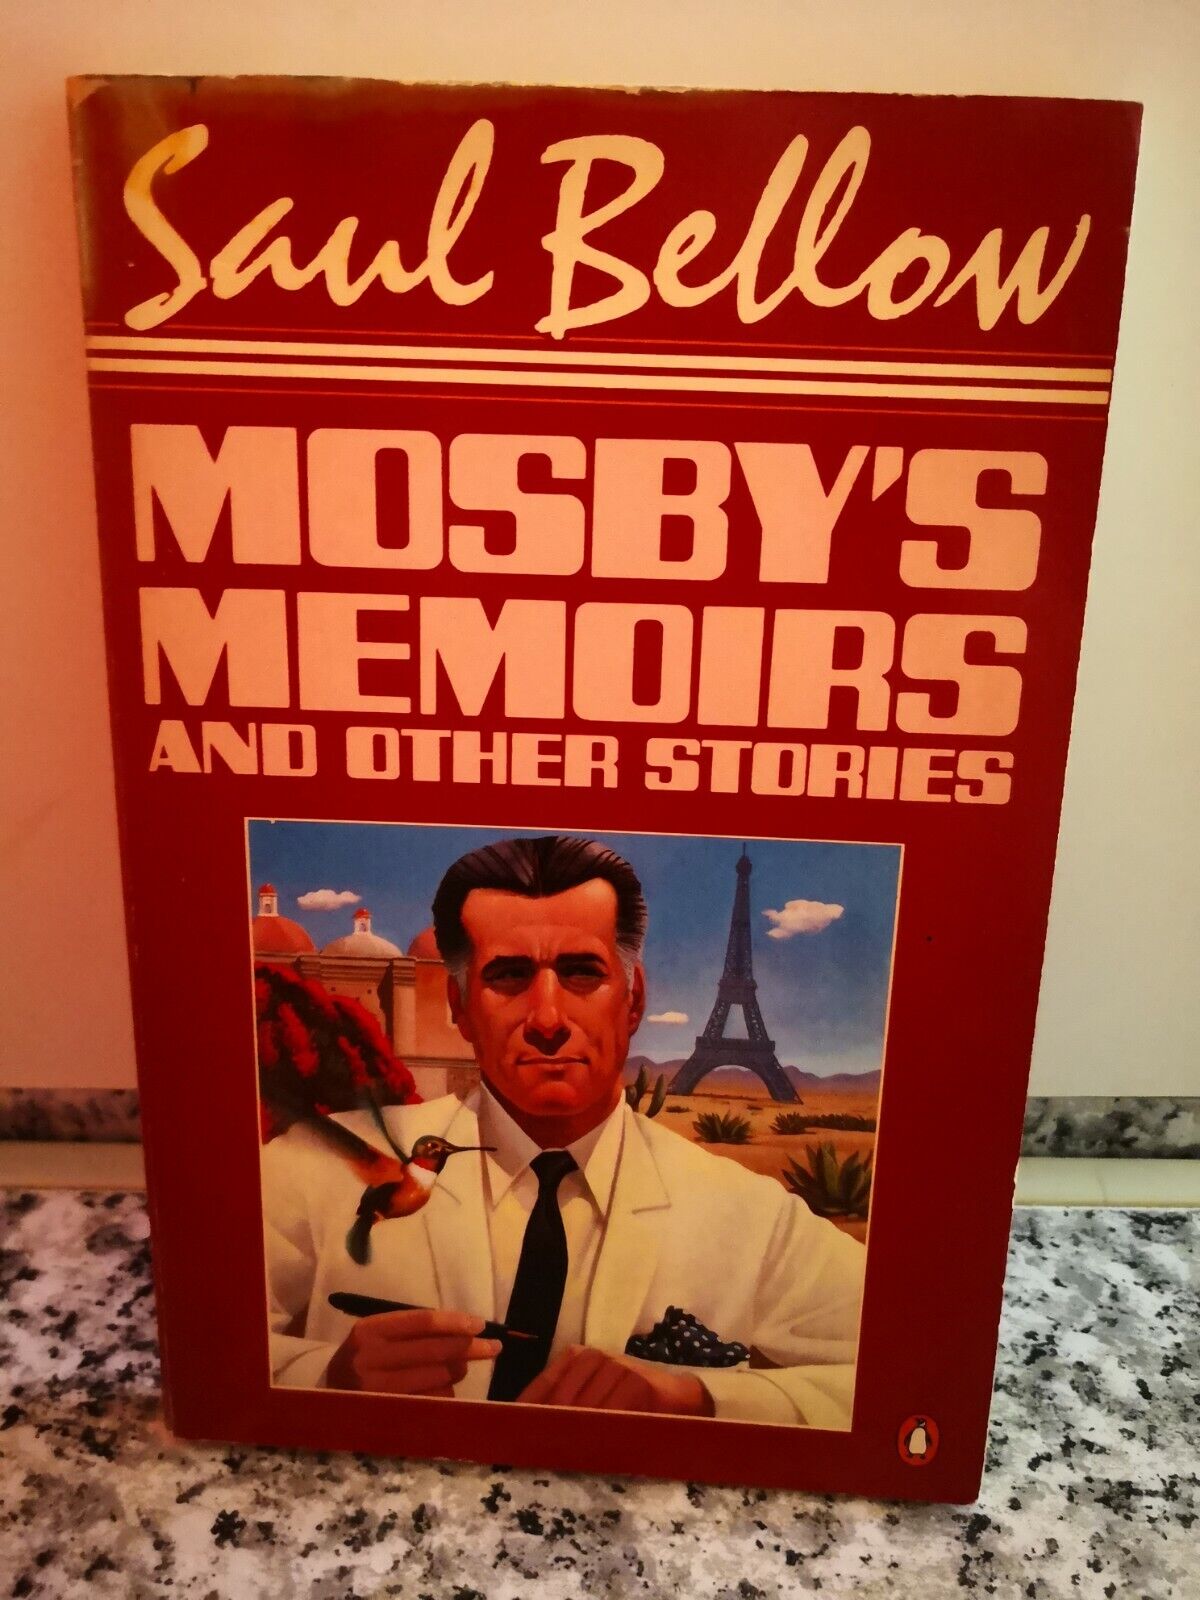   Mosby?s Memoirs and Other Stories  di Saul Bellow,  1976,  Books On Tape -F